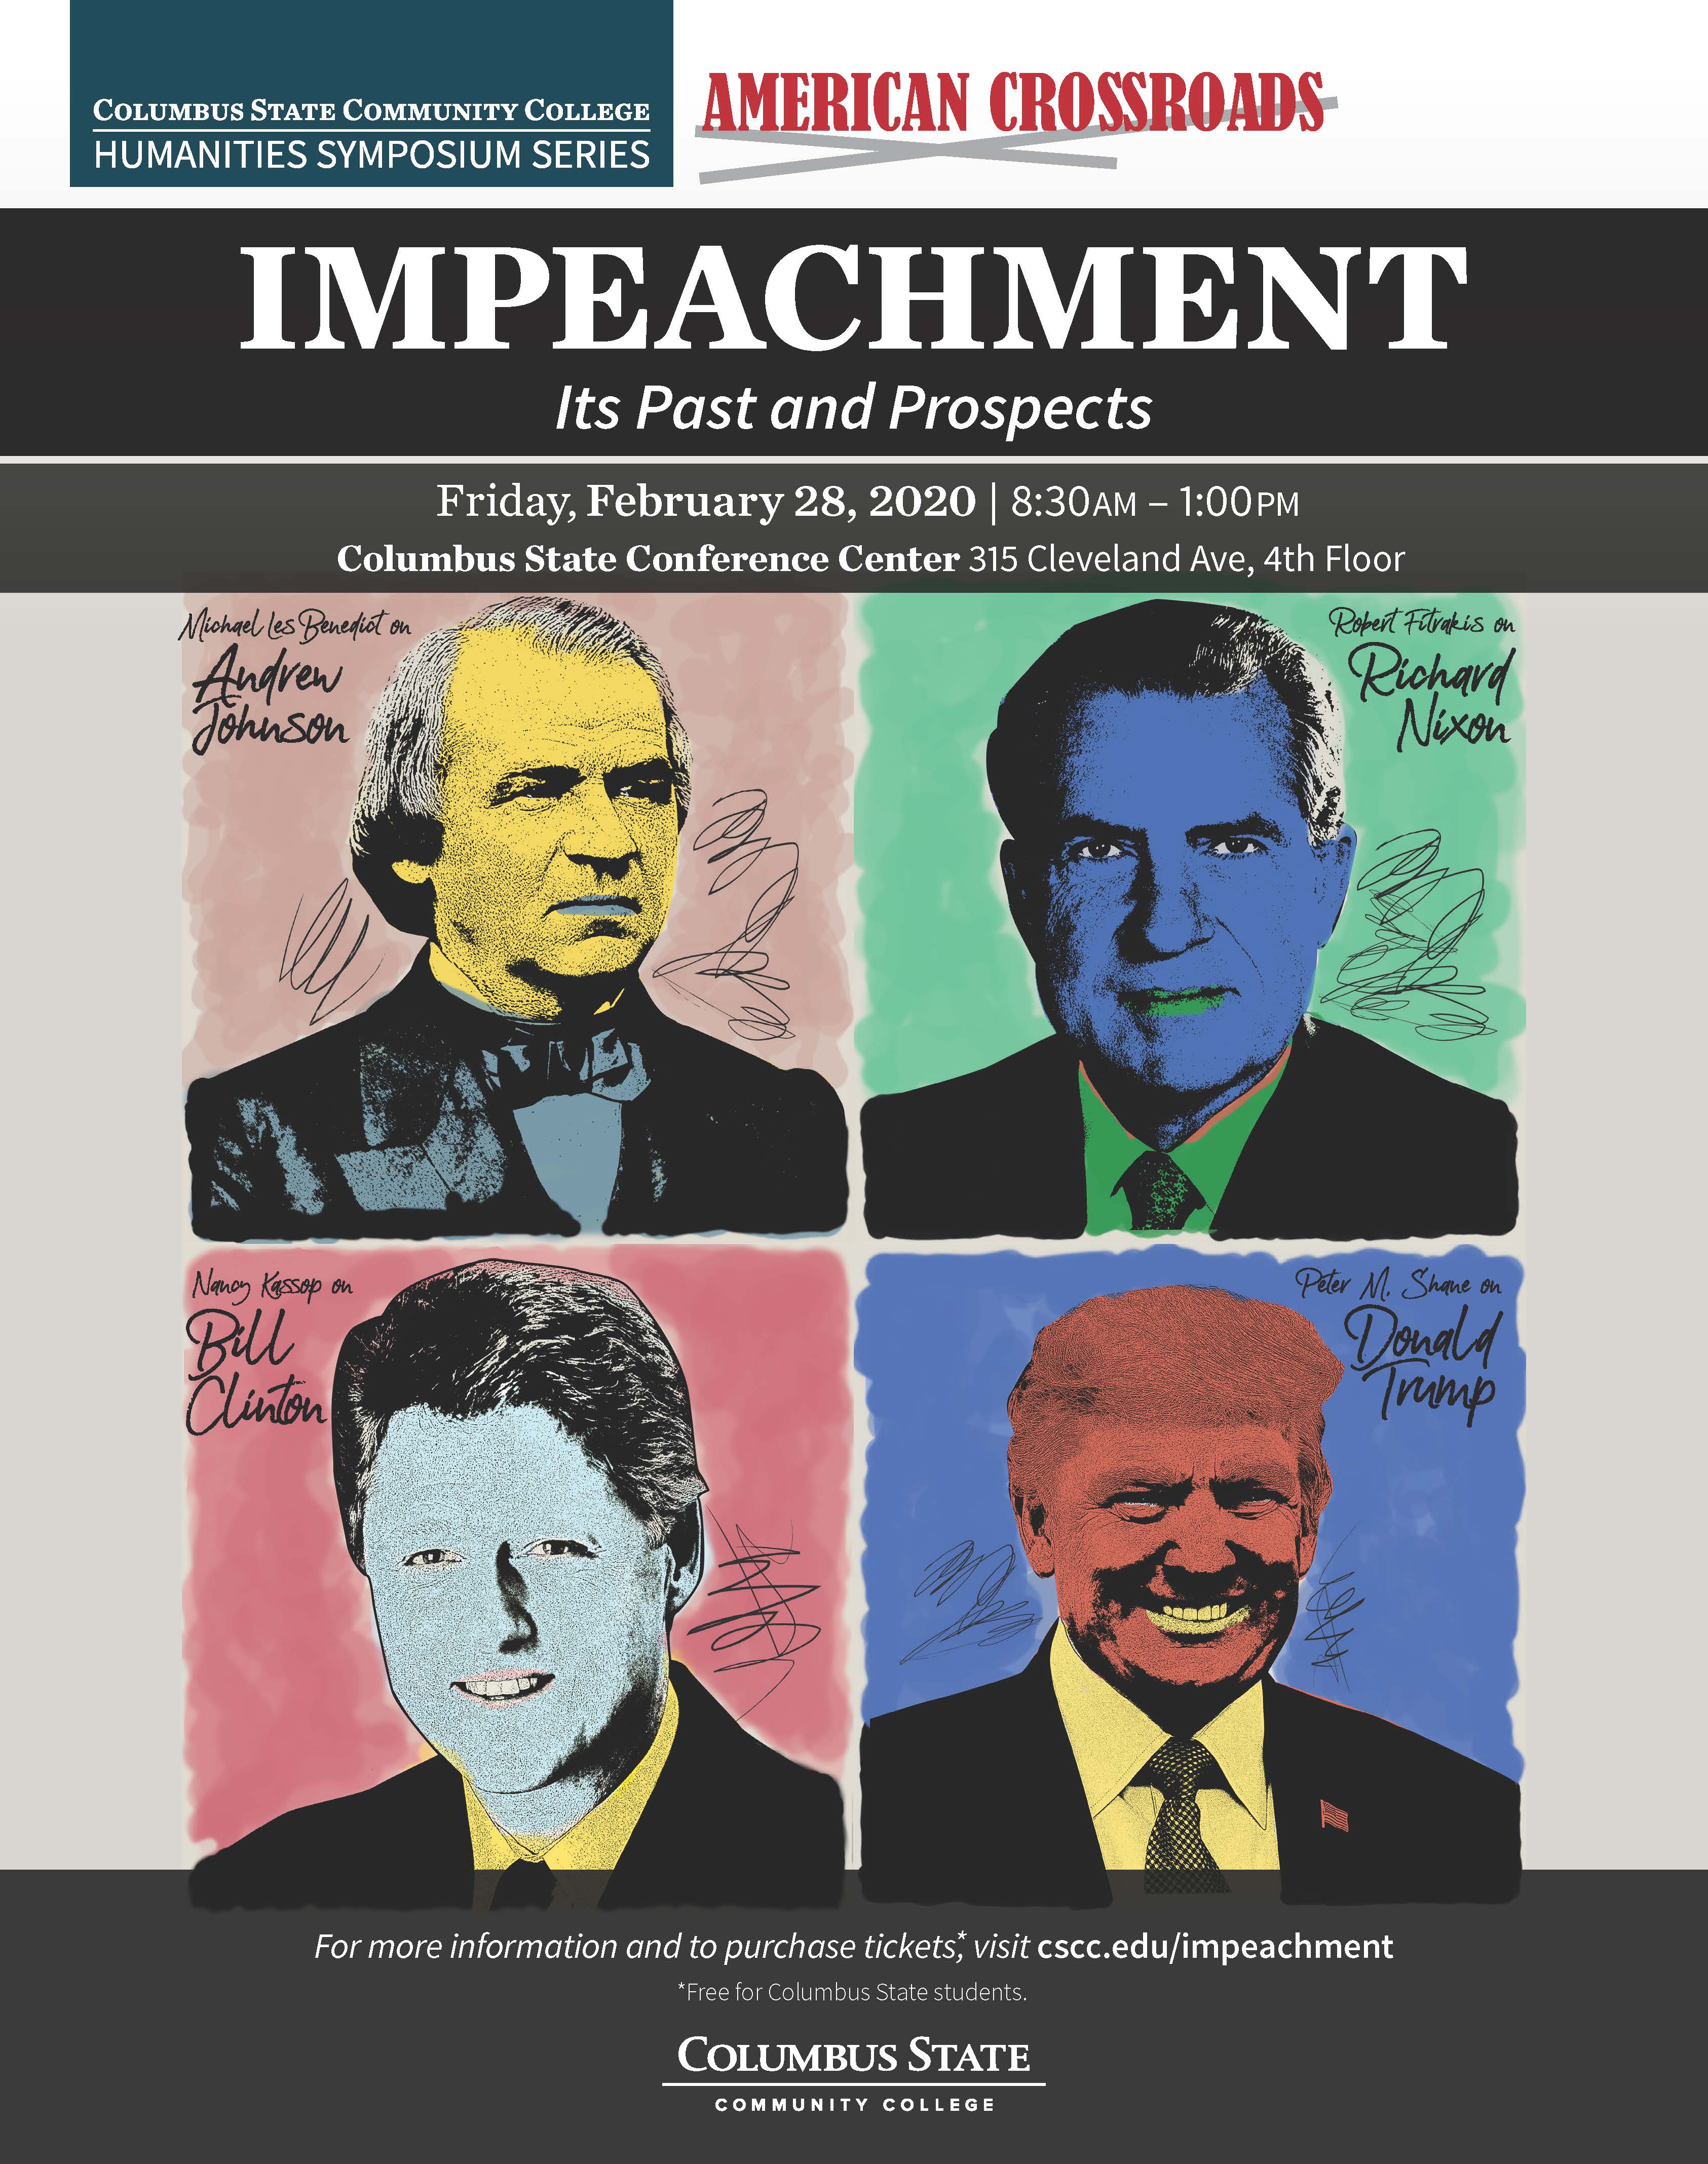 Picture of the poster for the event with the four presidents on it.